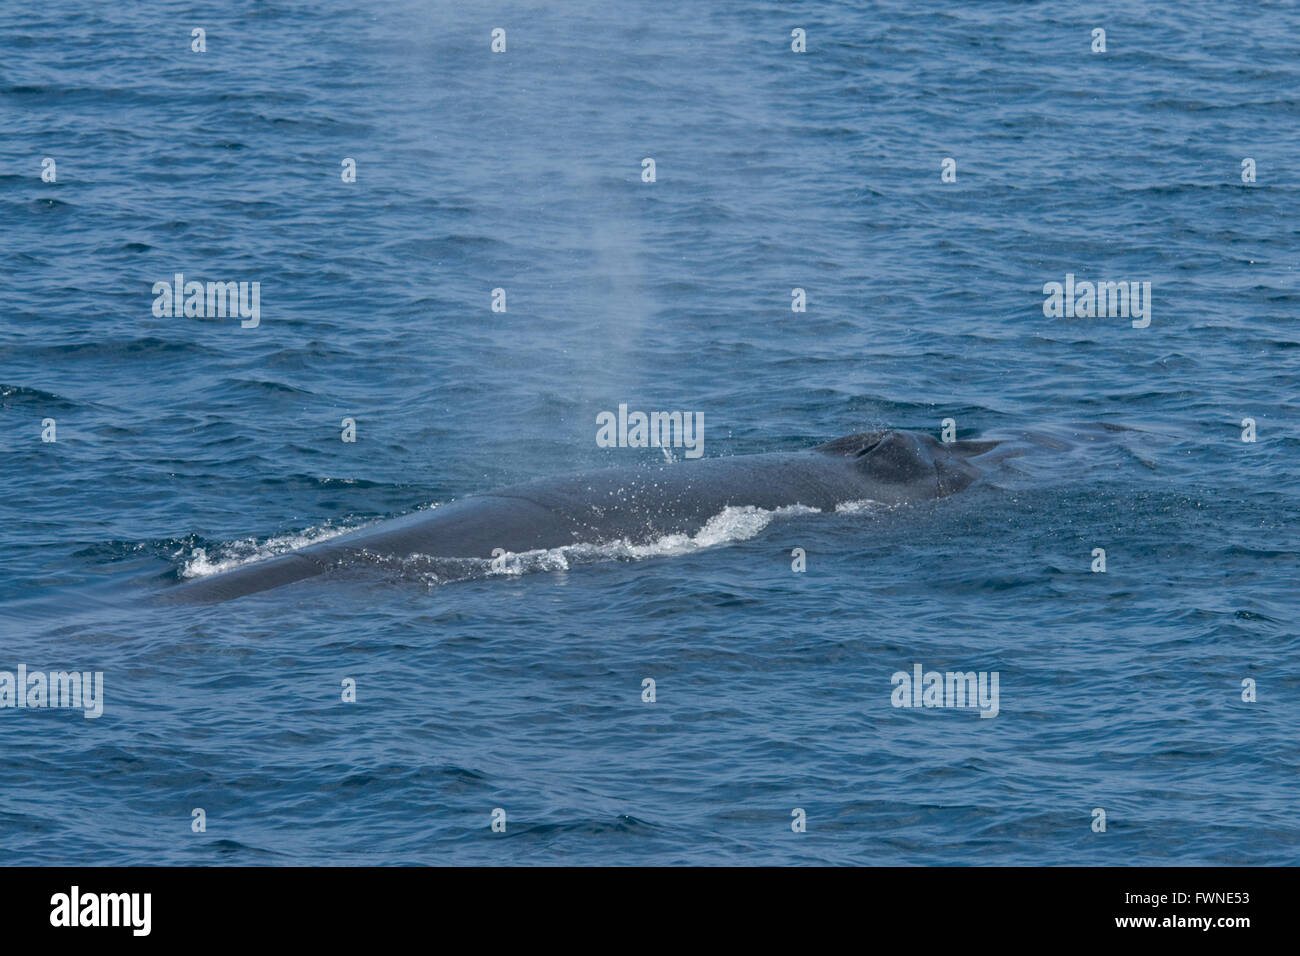 Bryde's Whale, Balaenoptera edeni or Balaenoptera brydei, blowing at surface, showing head & blowholes, Maldives, Indian Ocean Stock Photo